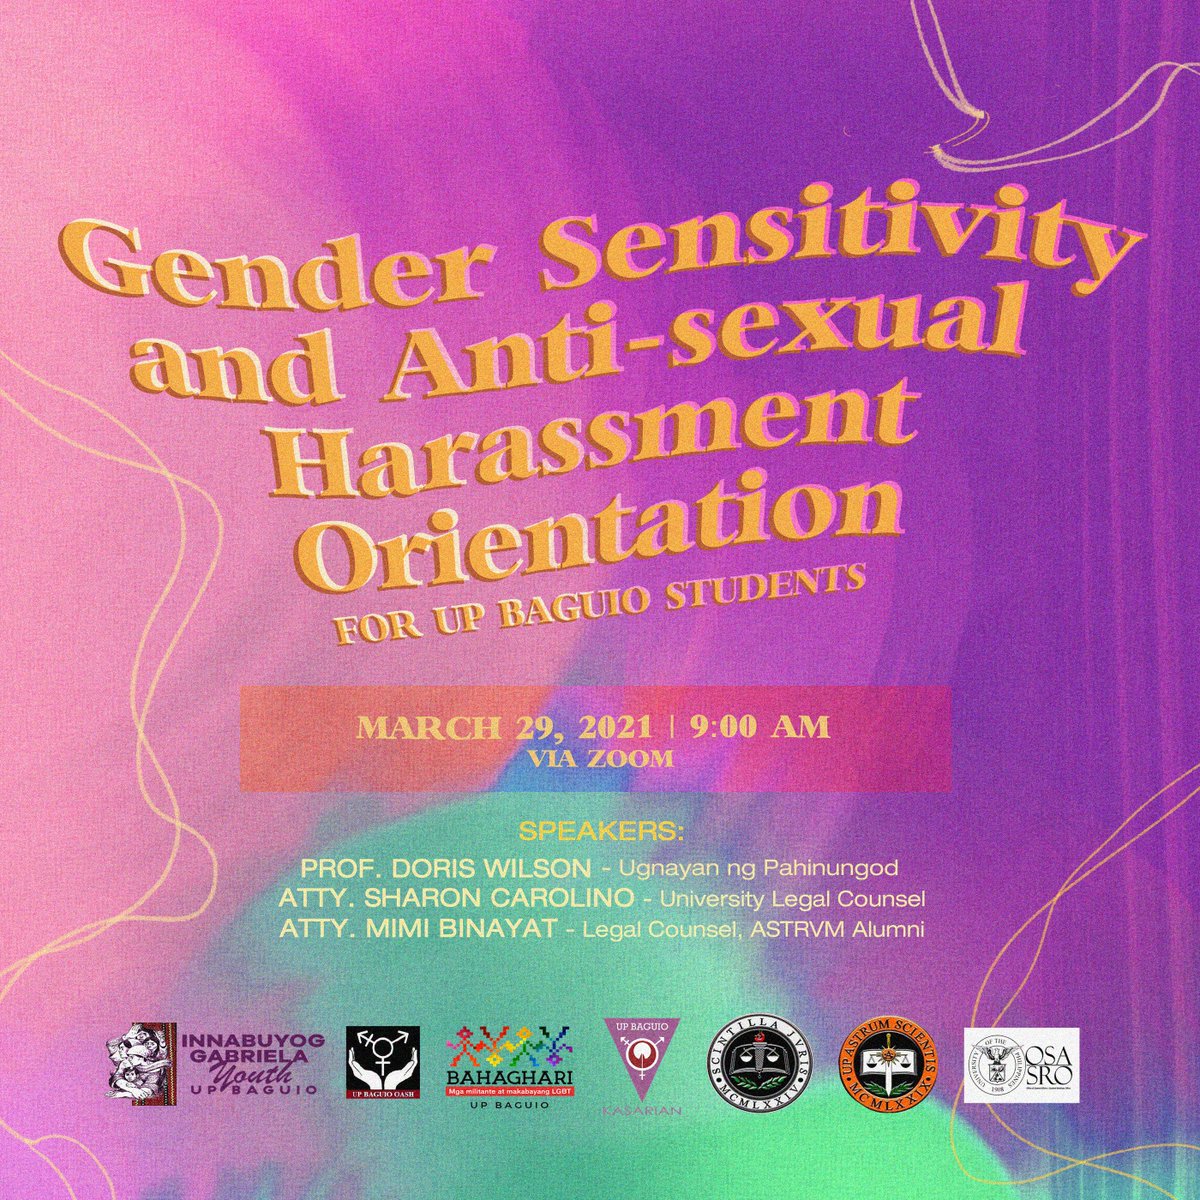 As part of this year's Women's Month celebration, there will be a Gender-Sensitivity - Anti-Sexual Harassment Orientation on March 29, 9 AM - 12 NN via Zoom Webinar.

To join, register through this link: up-edu.zoom.us/webinar/regist…

#RiseResistUnite
#WomensMonth2021